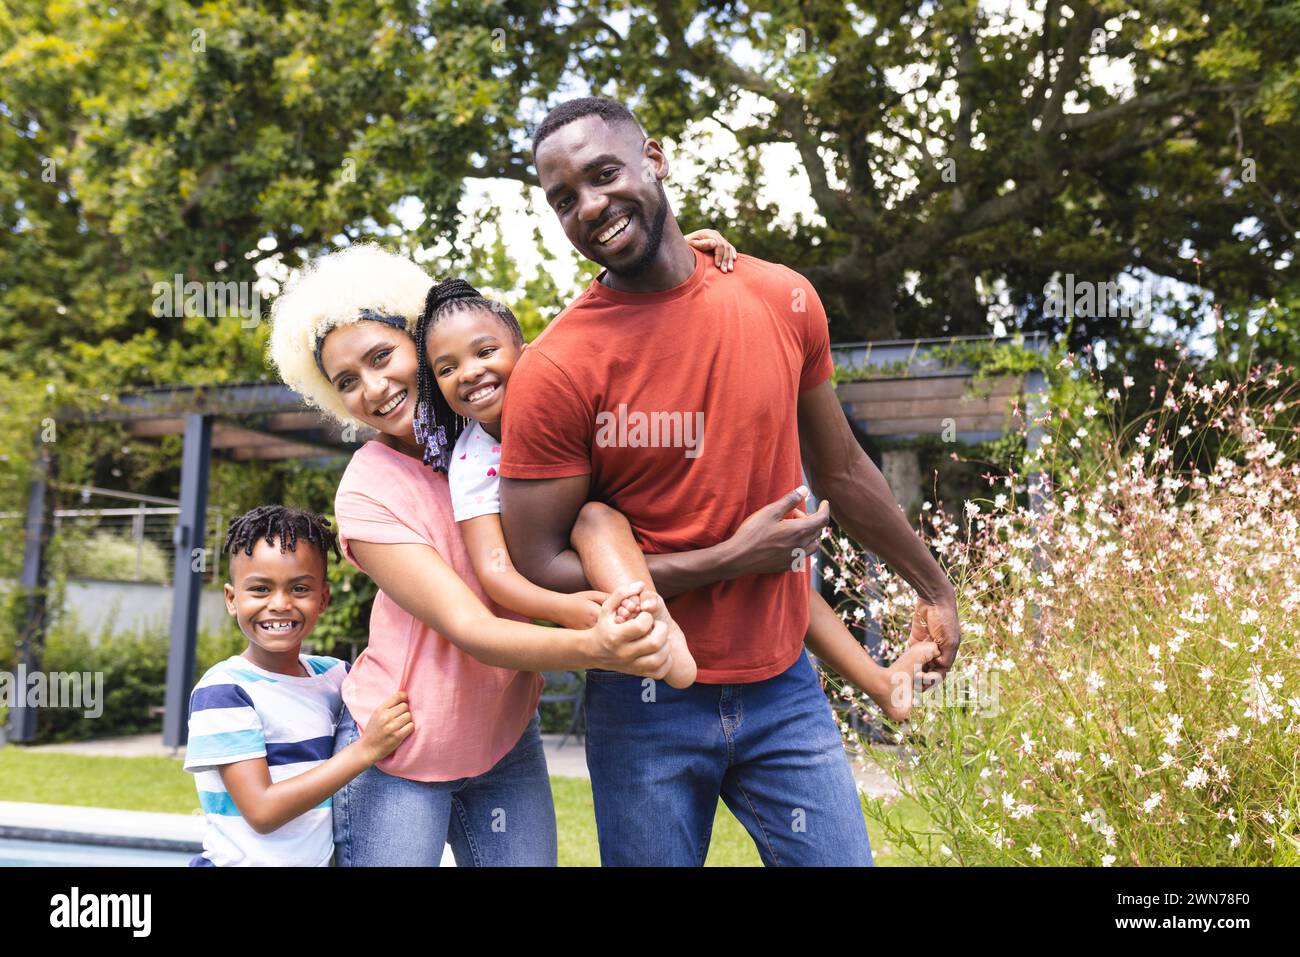 African American man and young biracial woman with their daughter and son are smiling outdoors Stock Photo